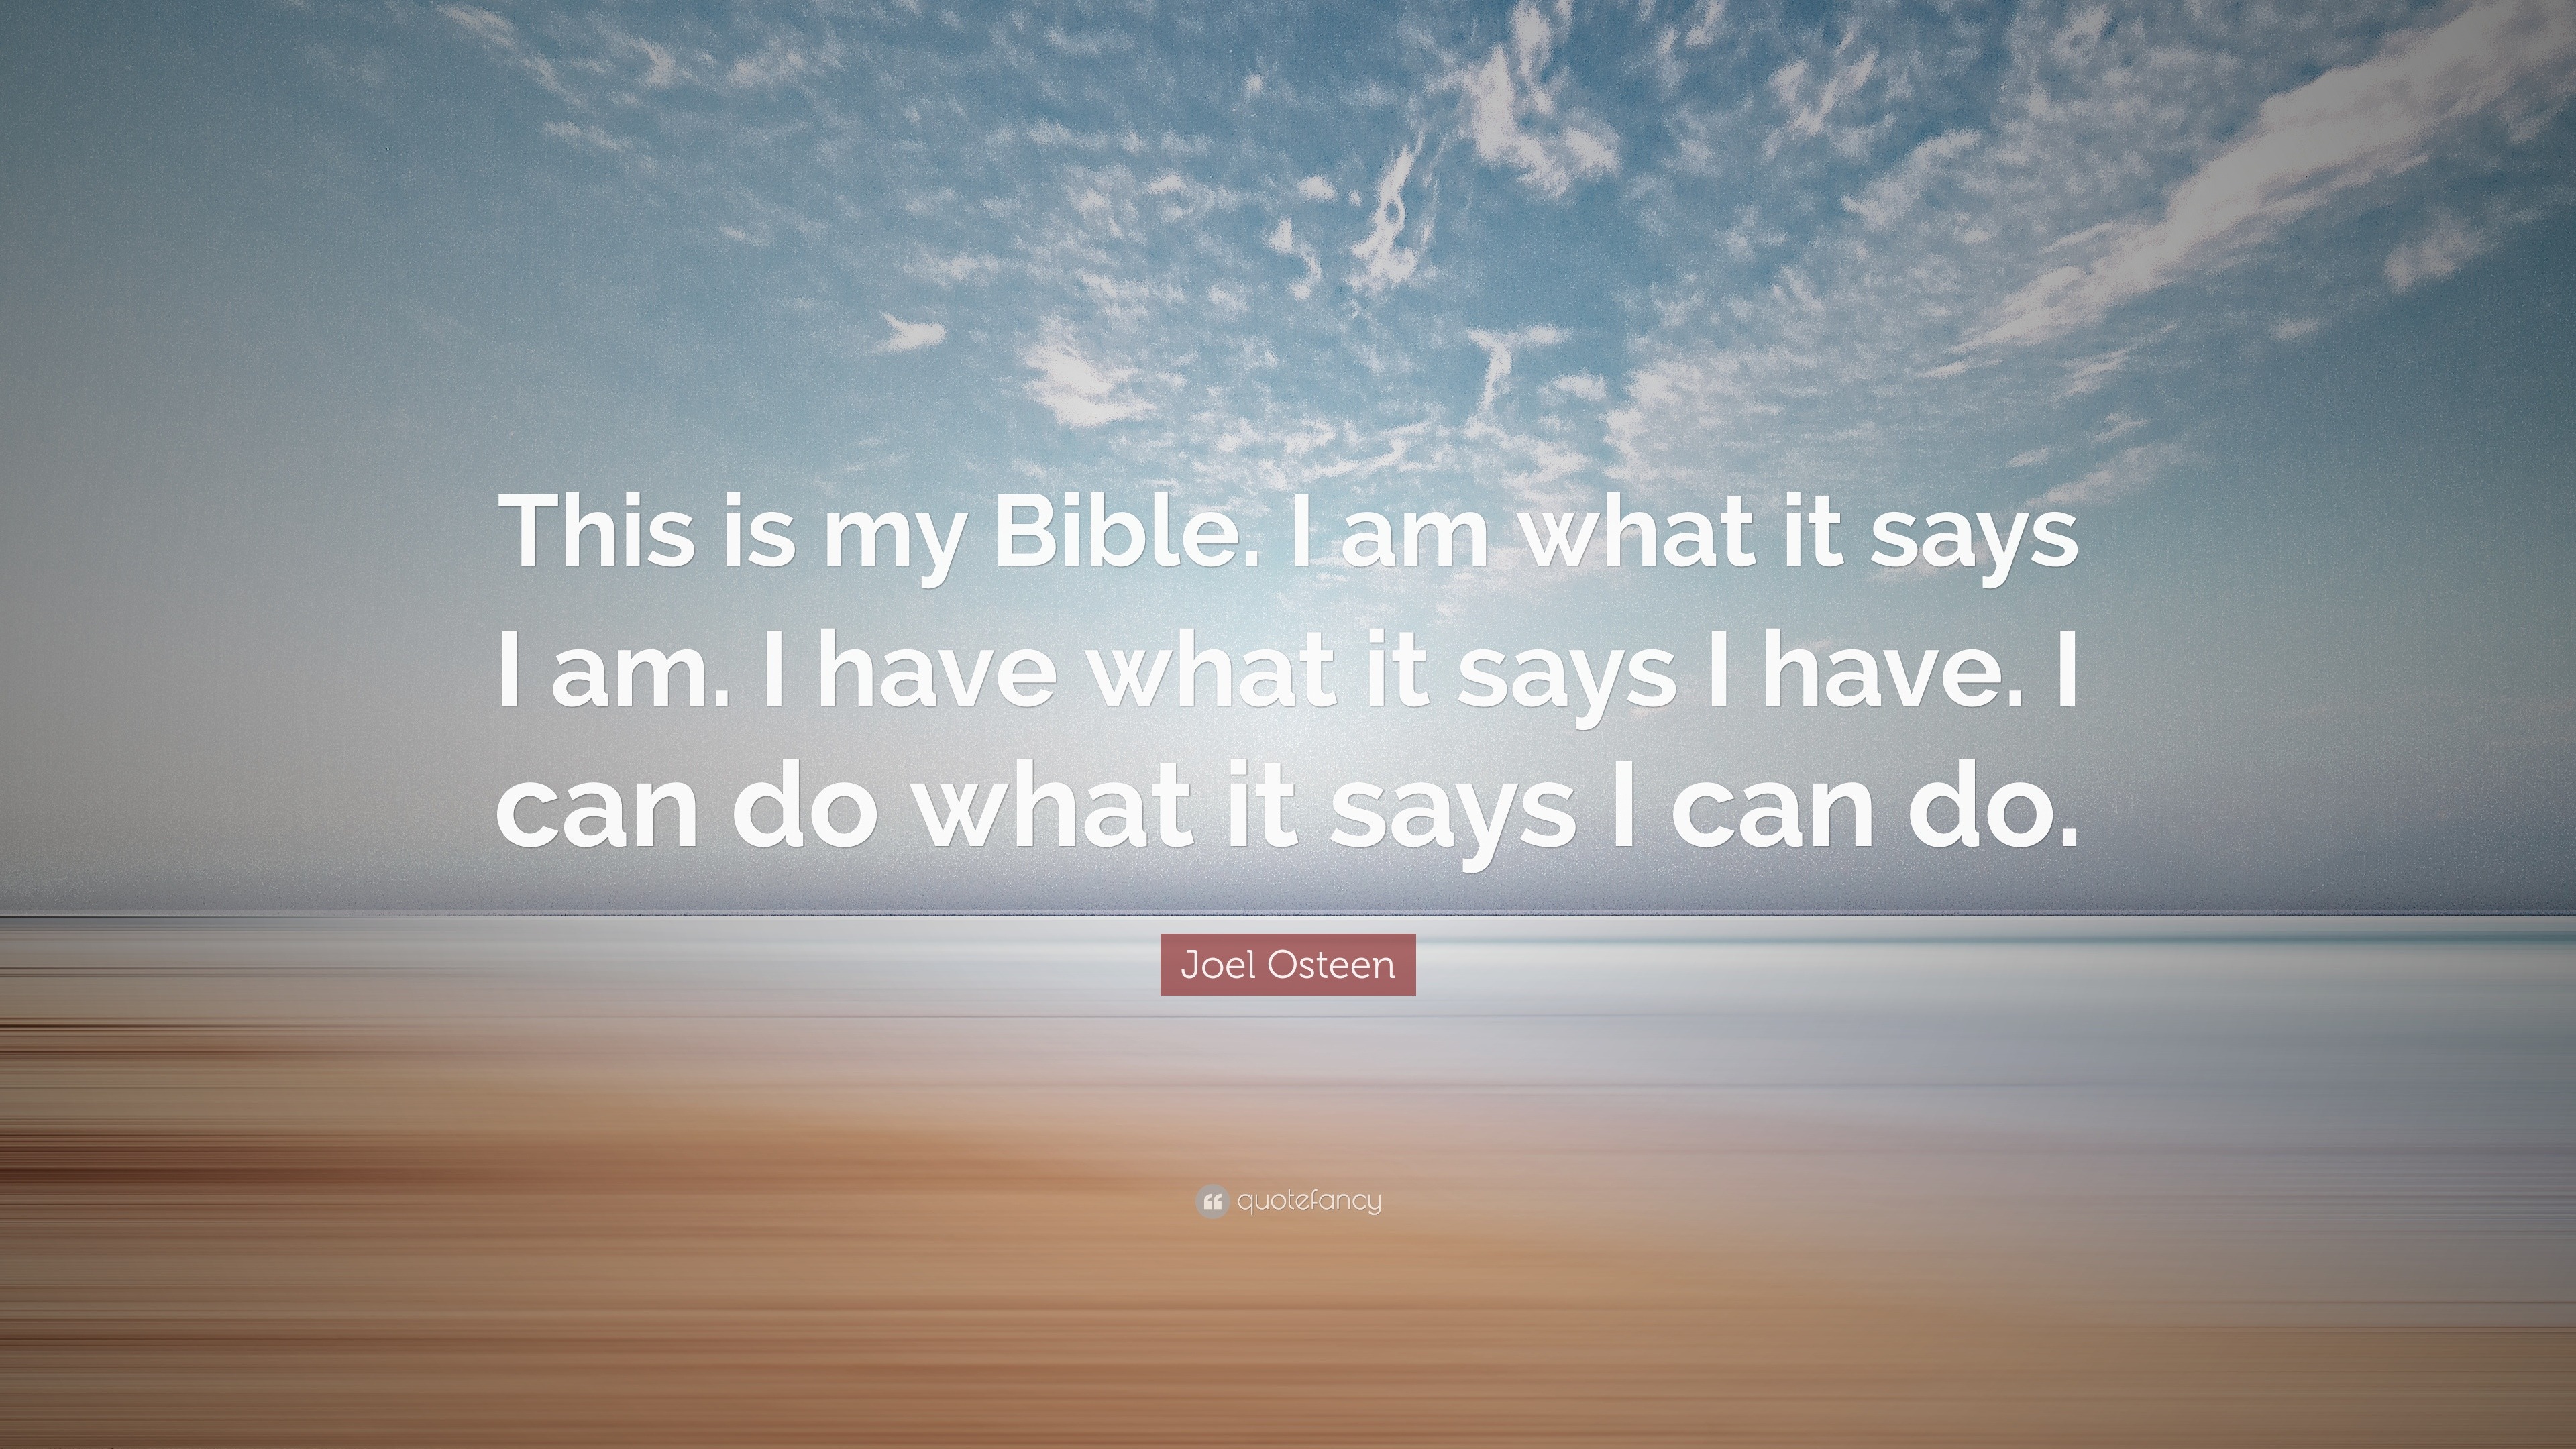 Joel Osteen Quote: “This Is My Bible. I Am What It Says I Am. I Have